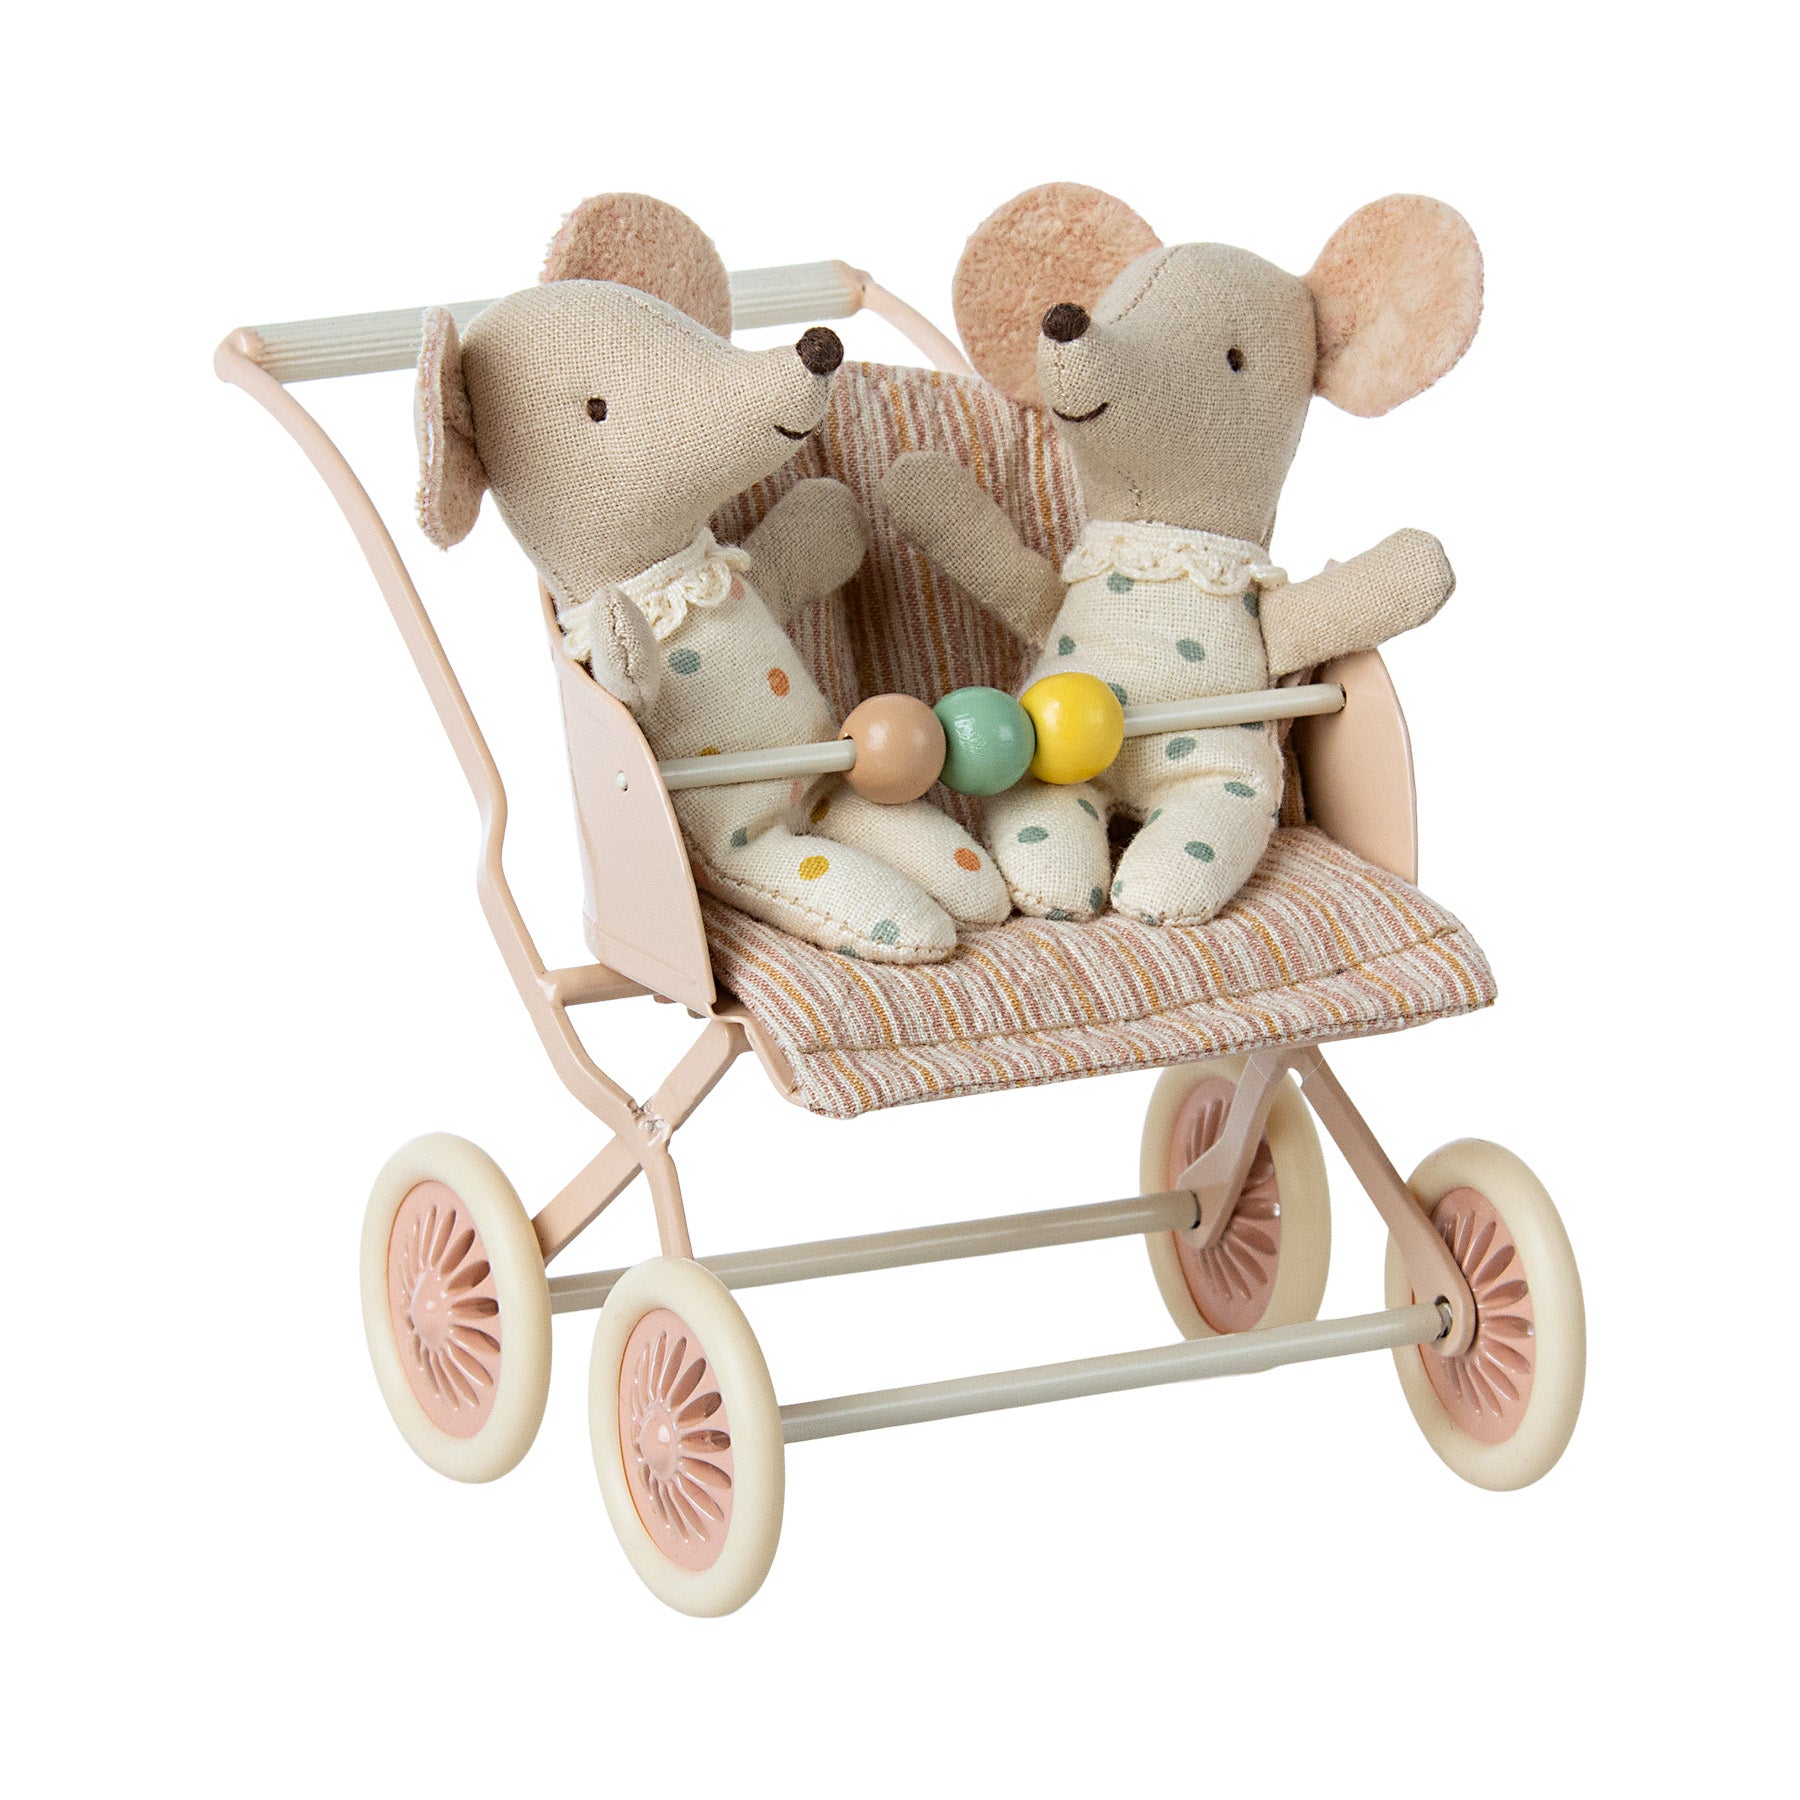 maileg pink stroller with 2 baby mice sitting in it from Maileg